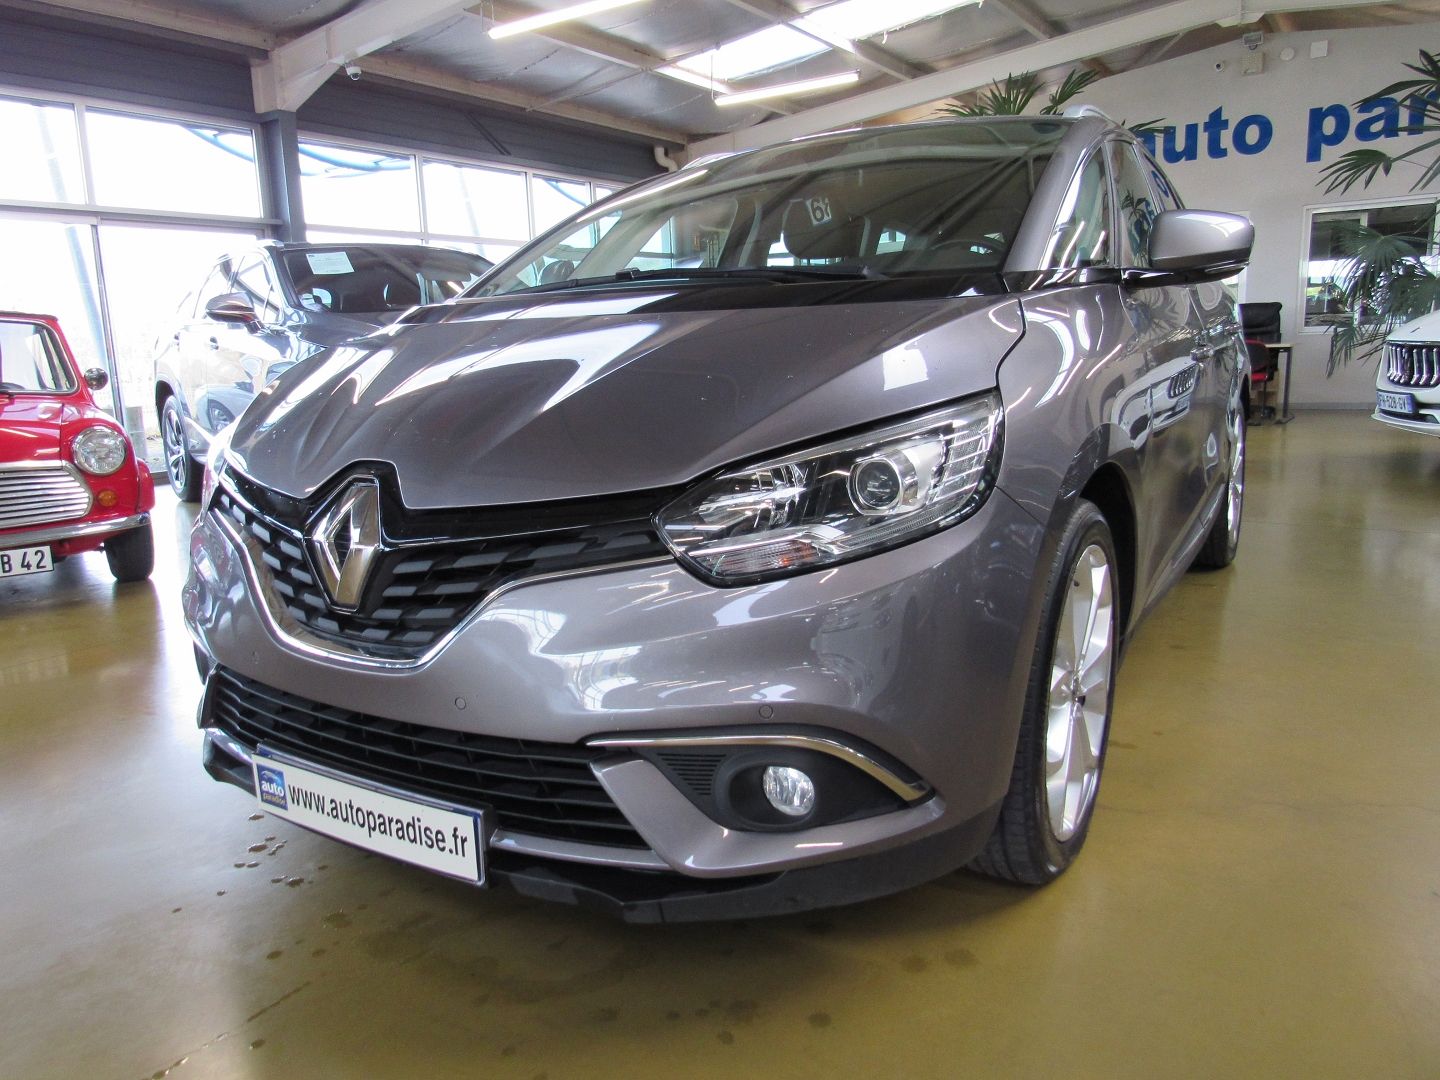 Véhicule d'occasion RENAULT GRAND SCENIC  1.5 DCI 110 BUSINESS EDC7